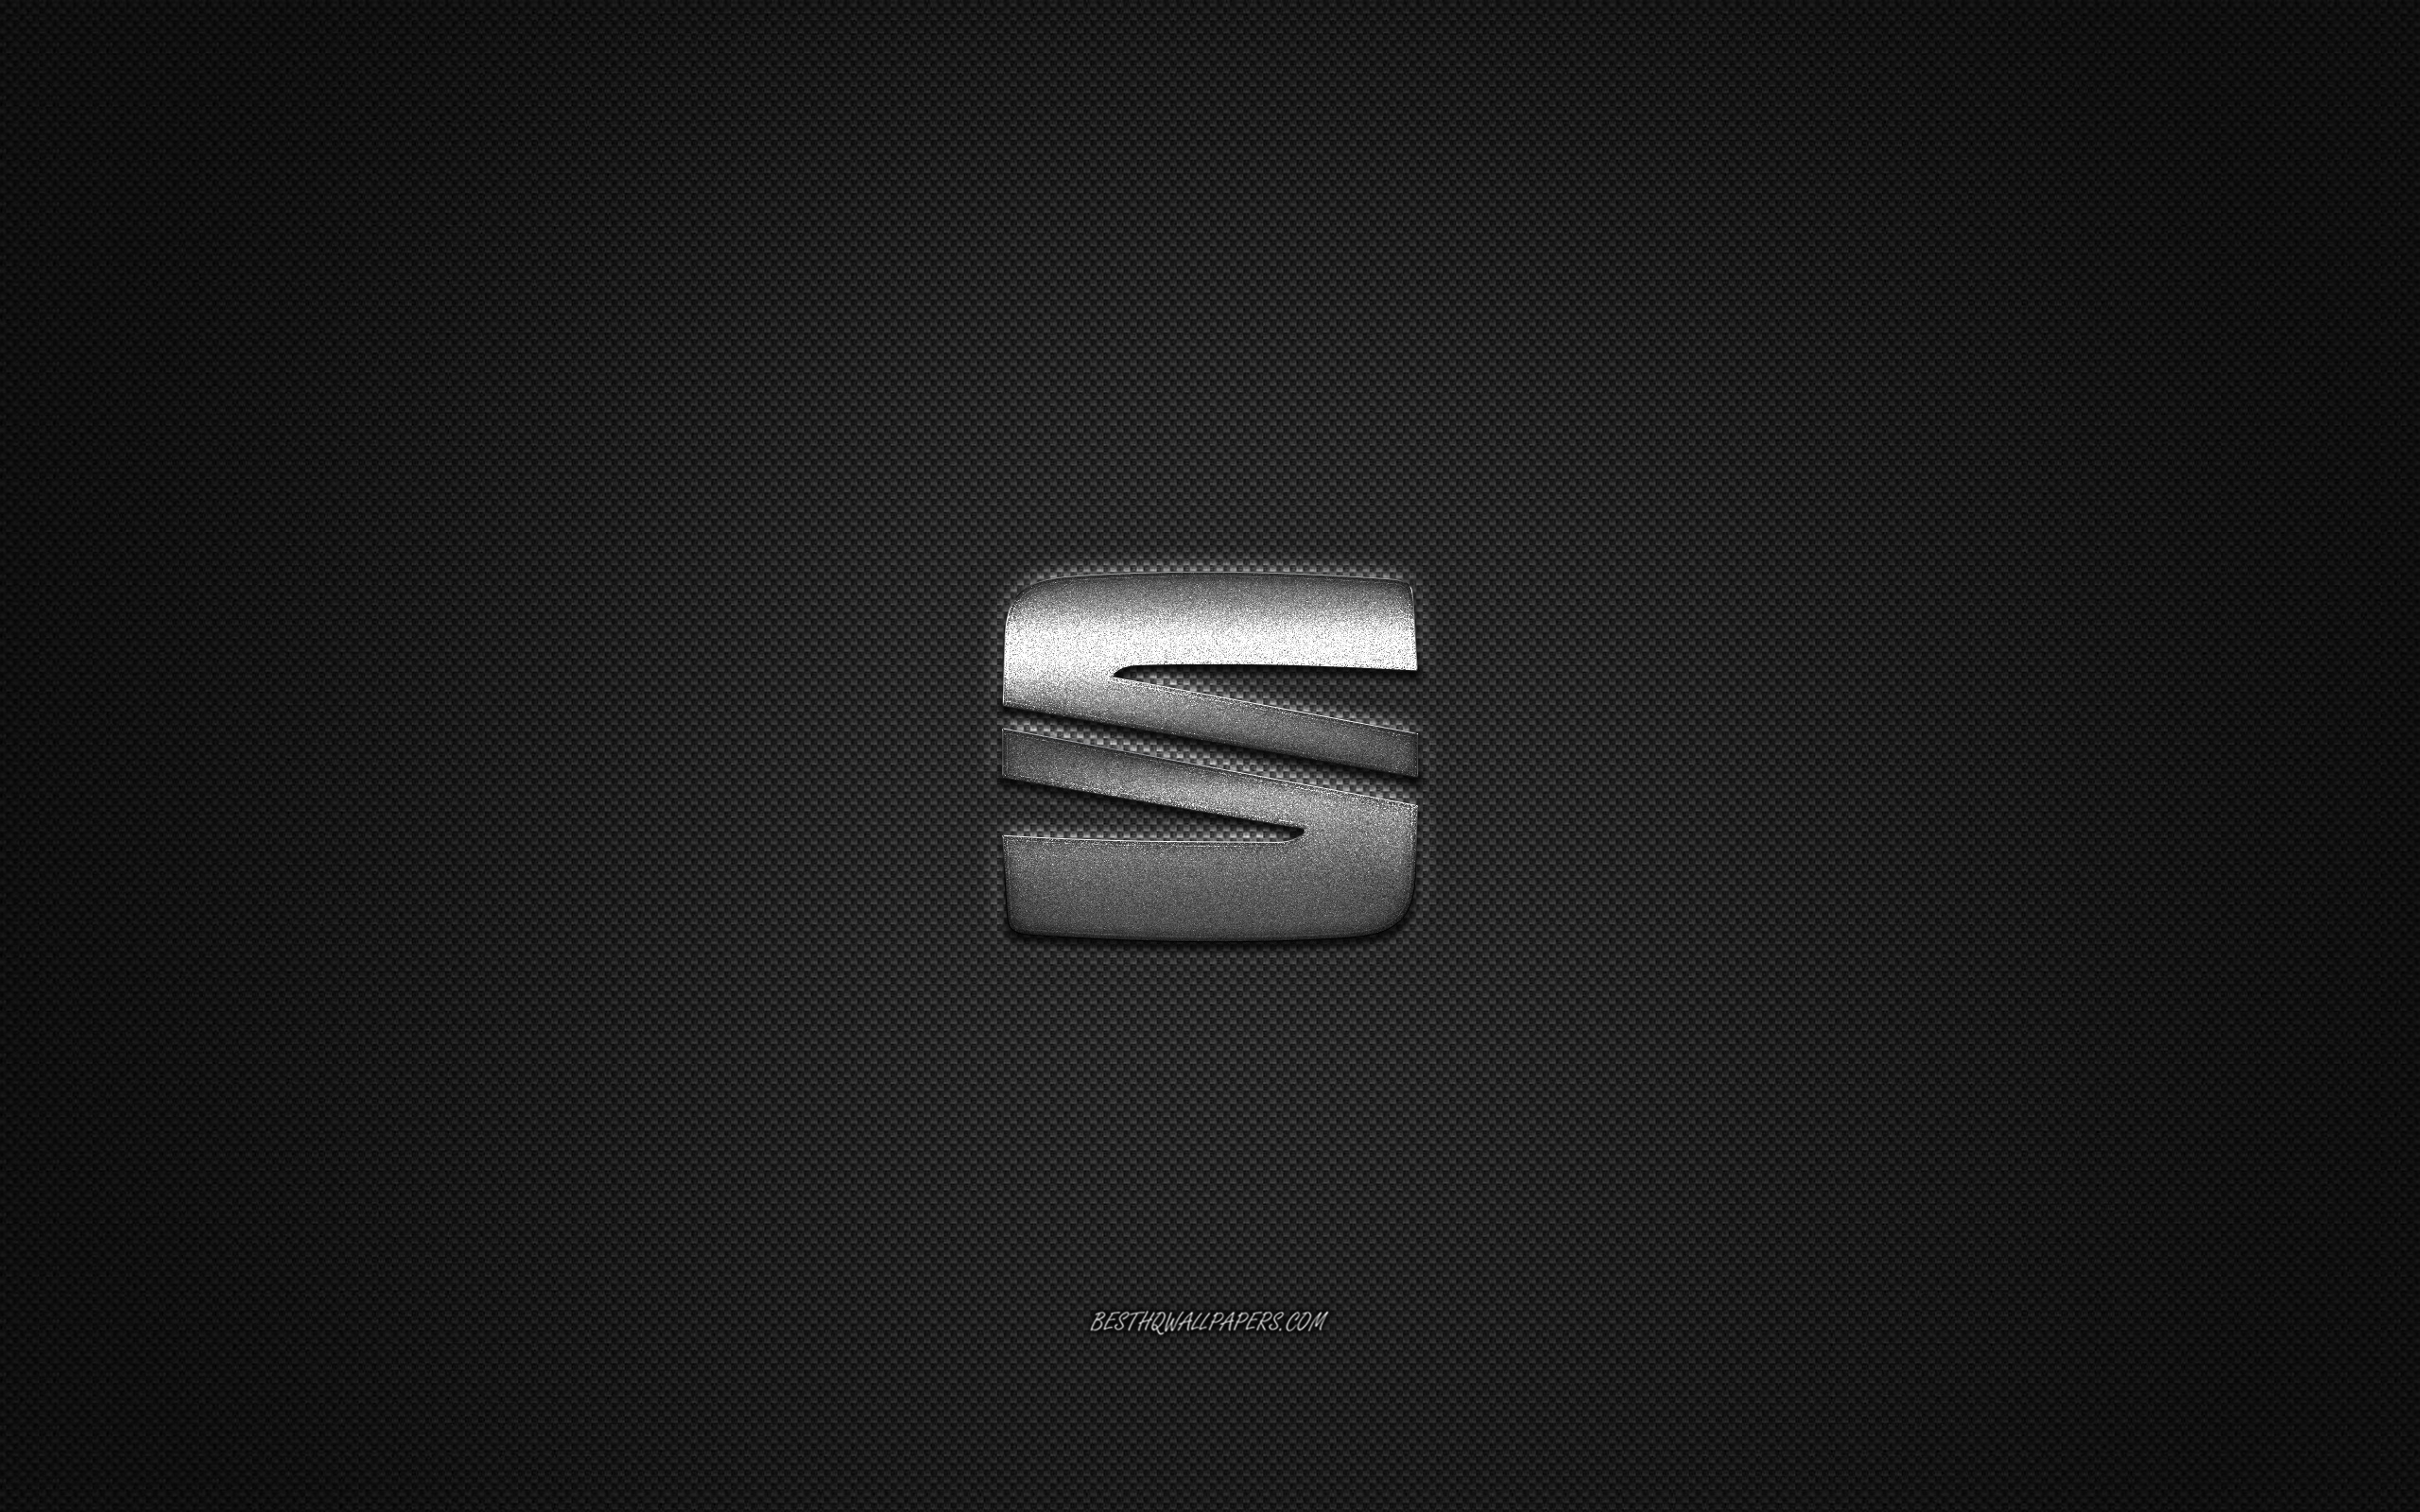 Download wallpaper Seat logo, silver logo, gray carbon fiber background, Seat metal emblem, Seat, cars brands, creative art for desktop with resolution 2560x1600. High Quality HD picture wallpaper